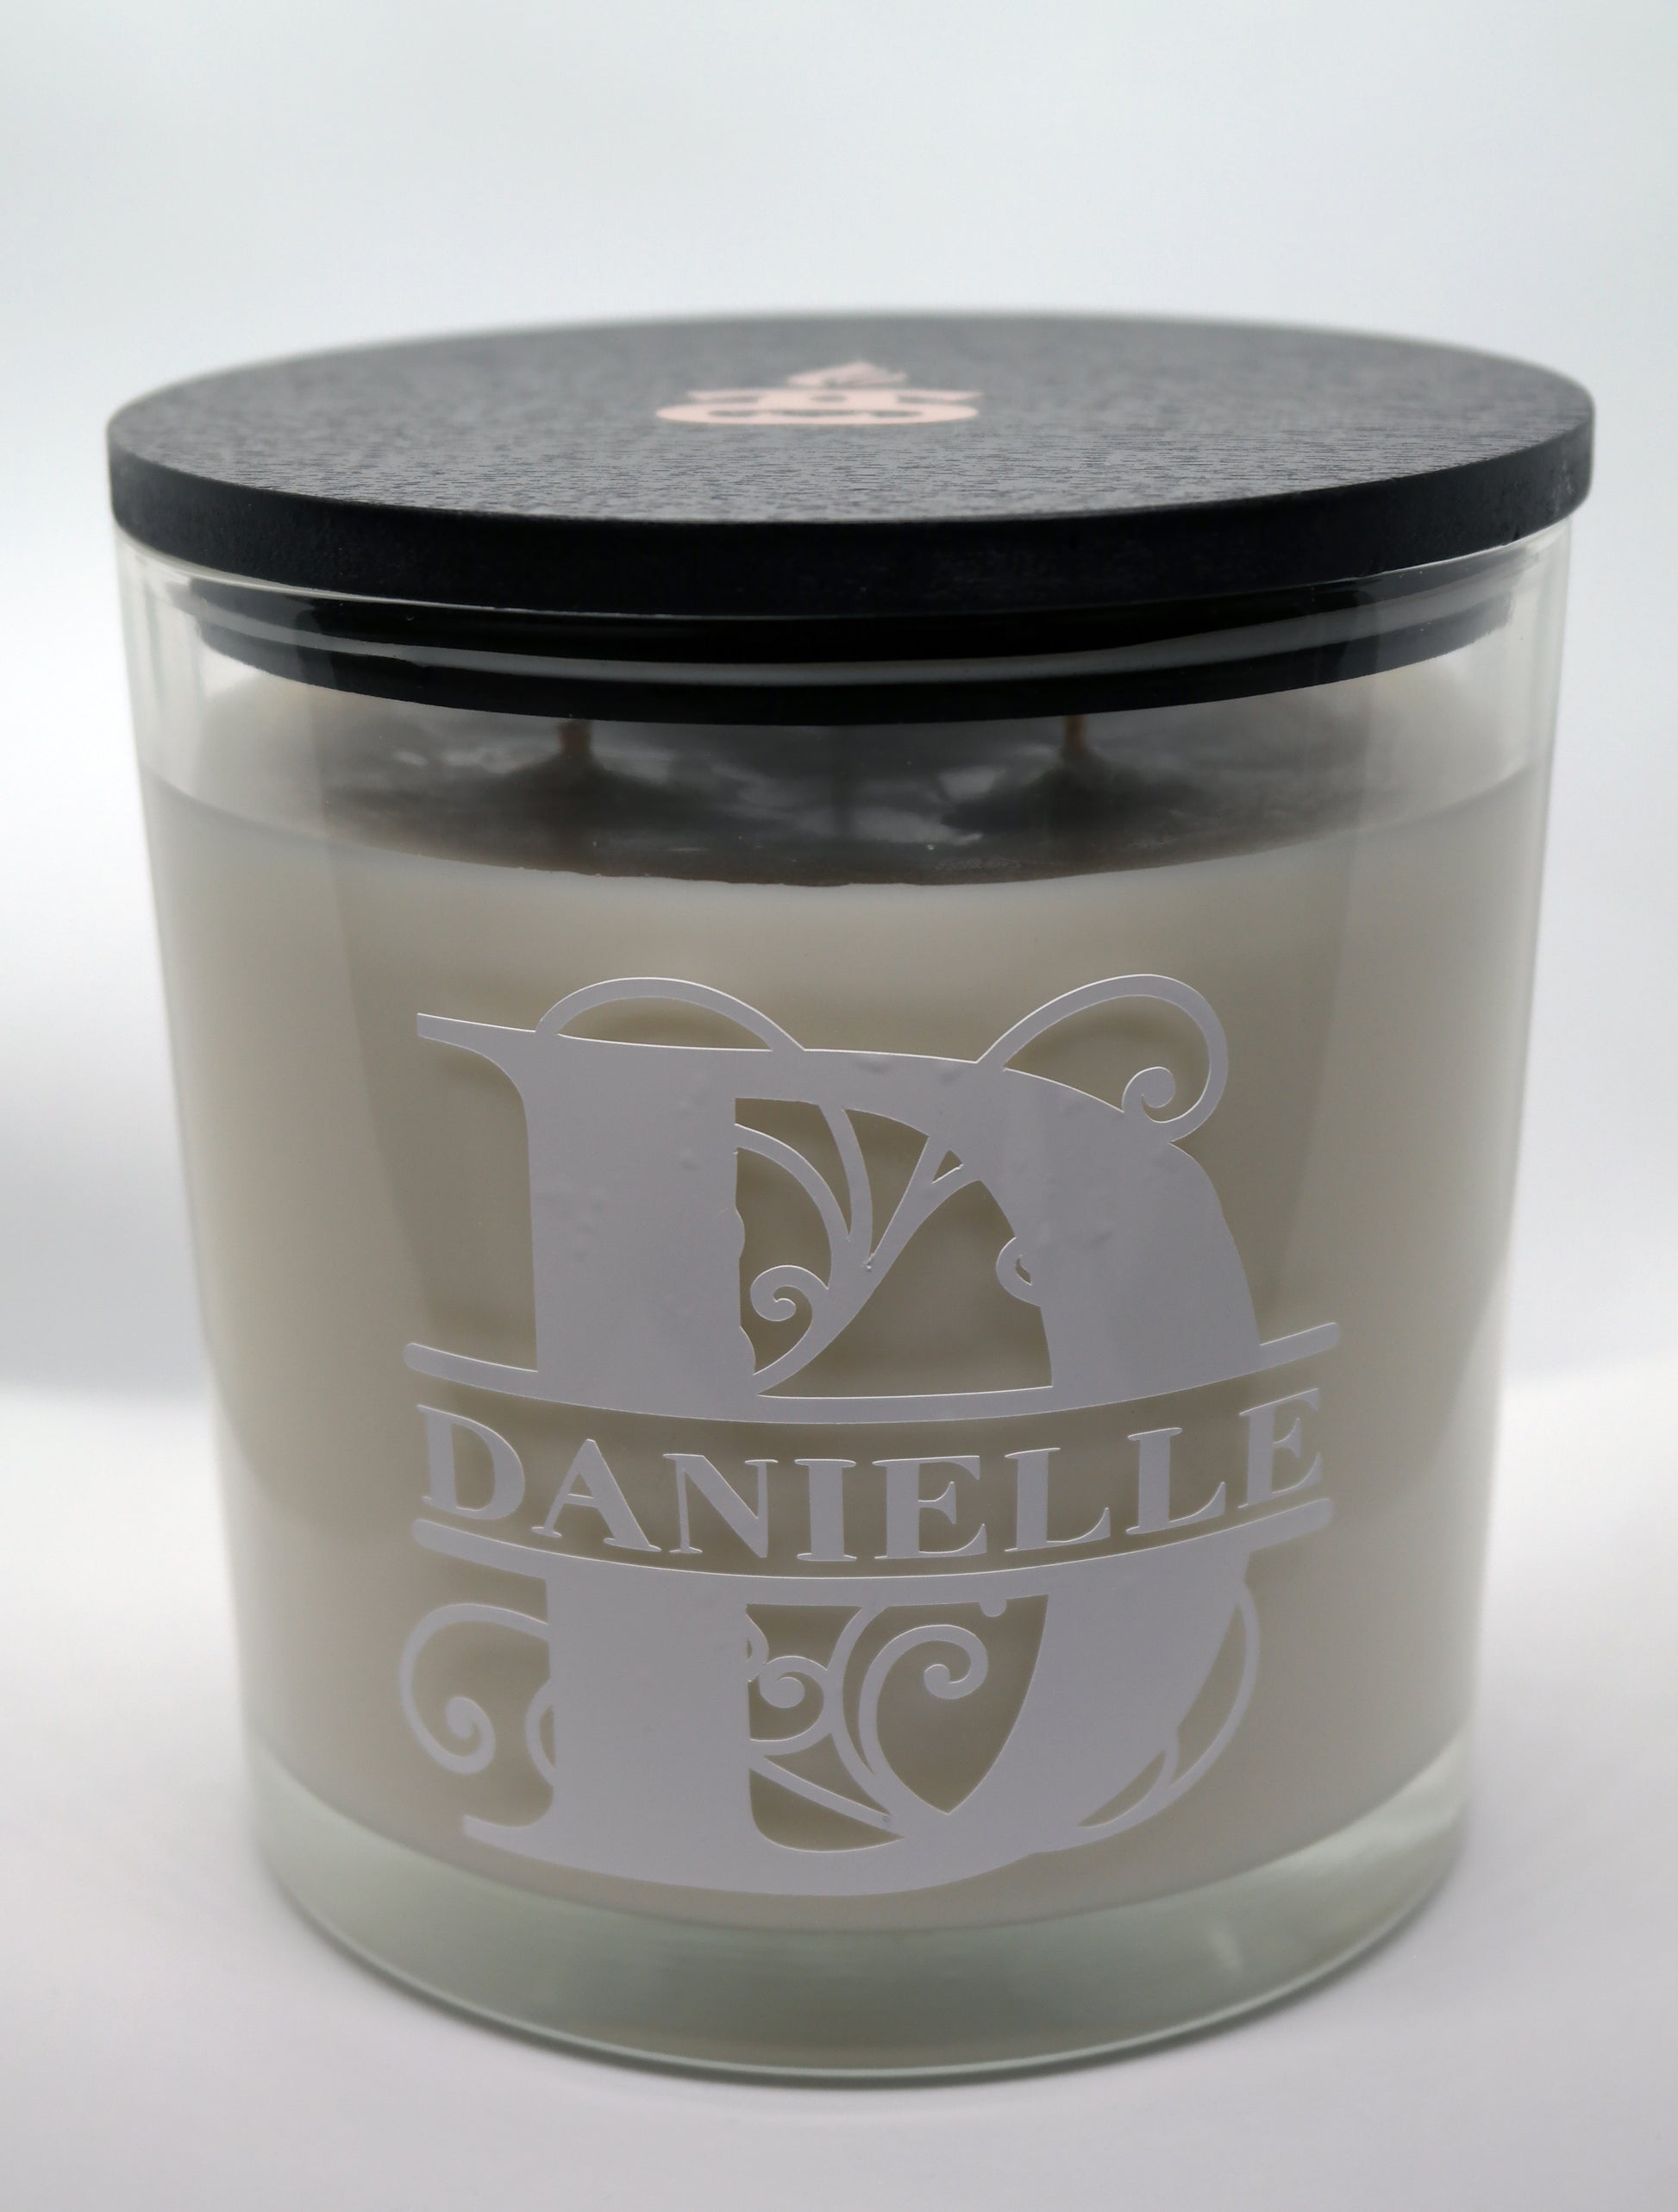 3 Wick Soy Wax Candles